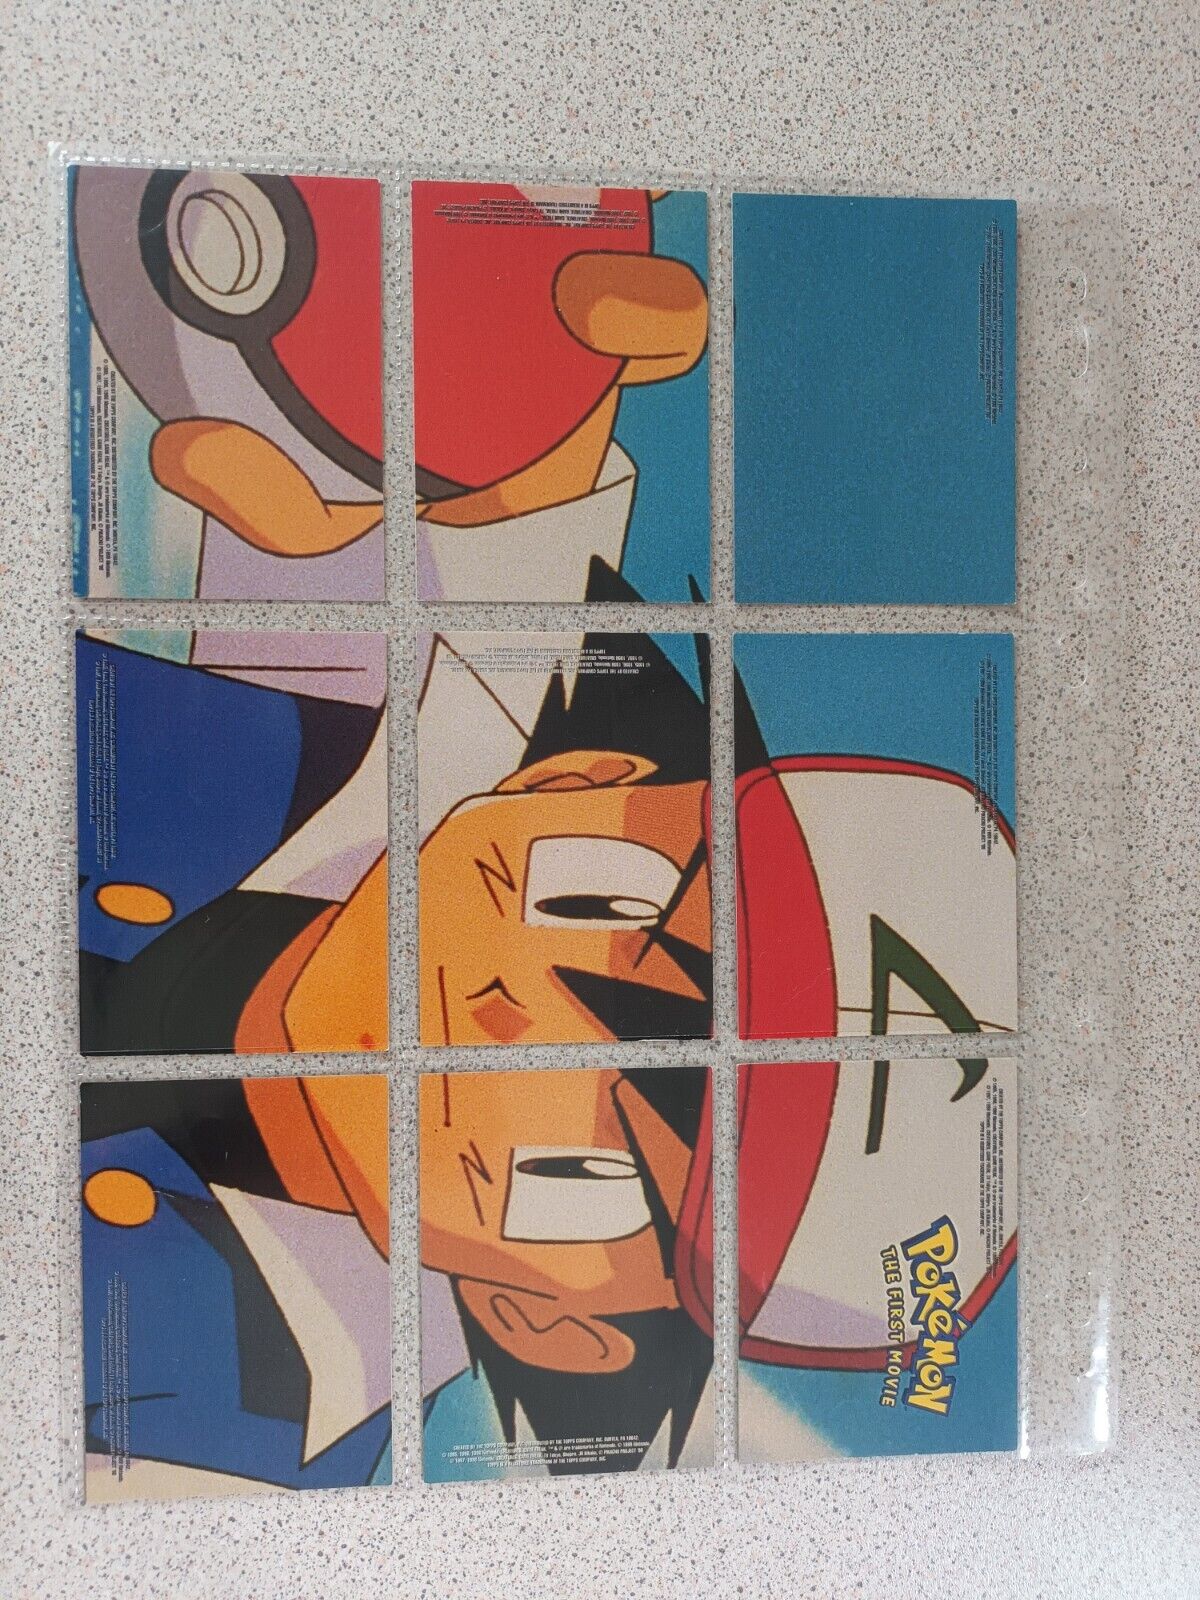 Topps Pokemon The 1st Movie Puzzle Sticker Card Set ASH,  1999 Rare Chase Cards.